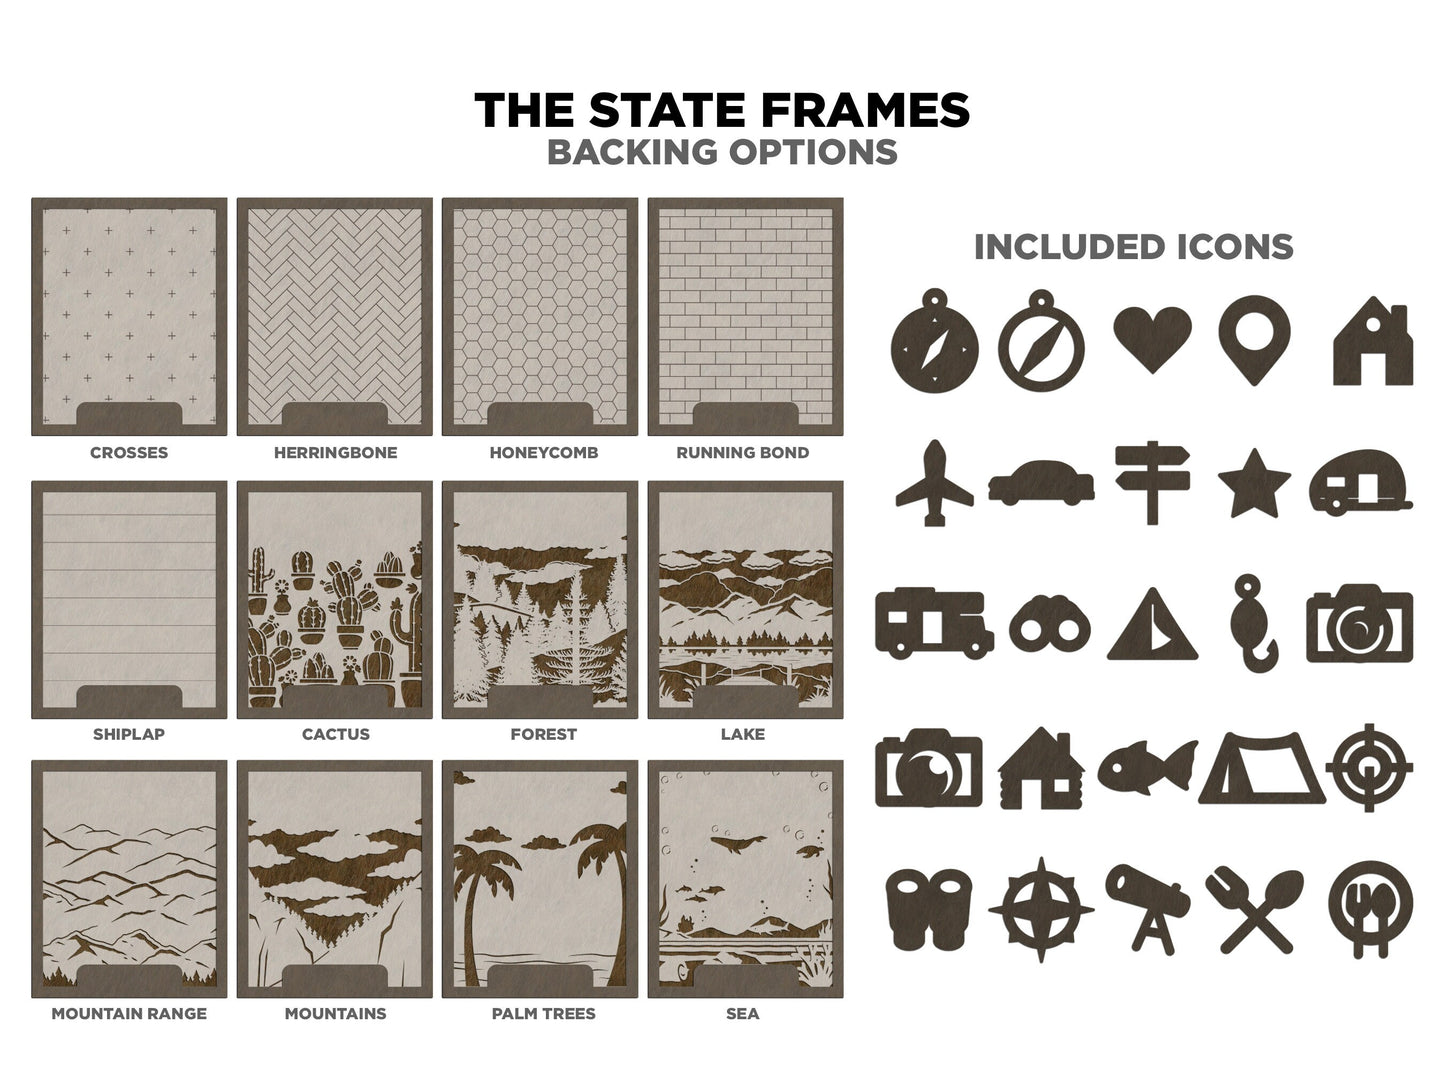 The Texas State Frame - 13 text options, 12 backgrounds, 25 icons Included - Make over 7,500 designs - Glowforge & Lightburn Tested